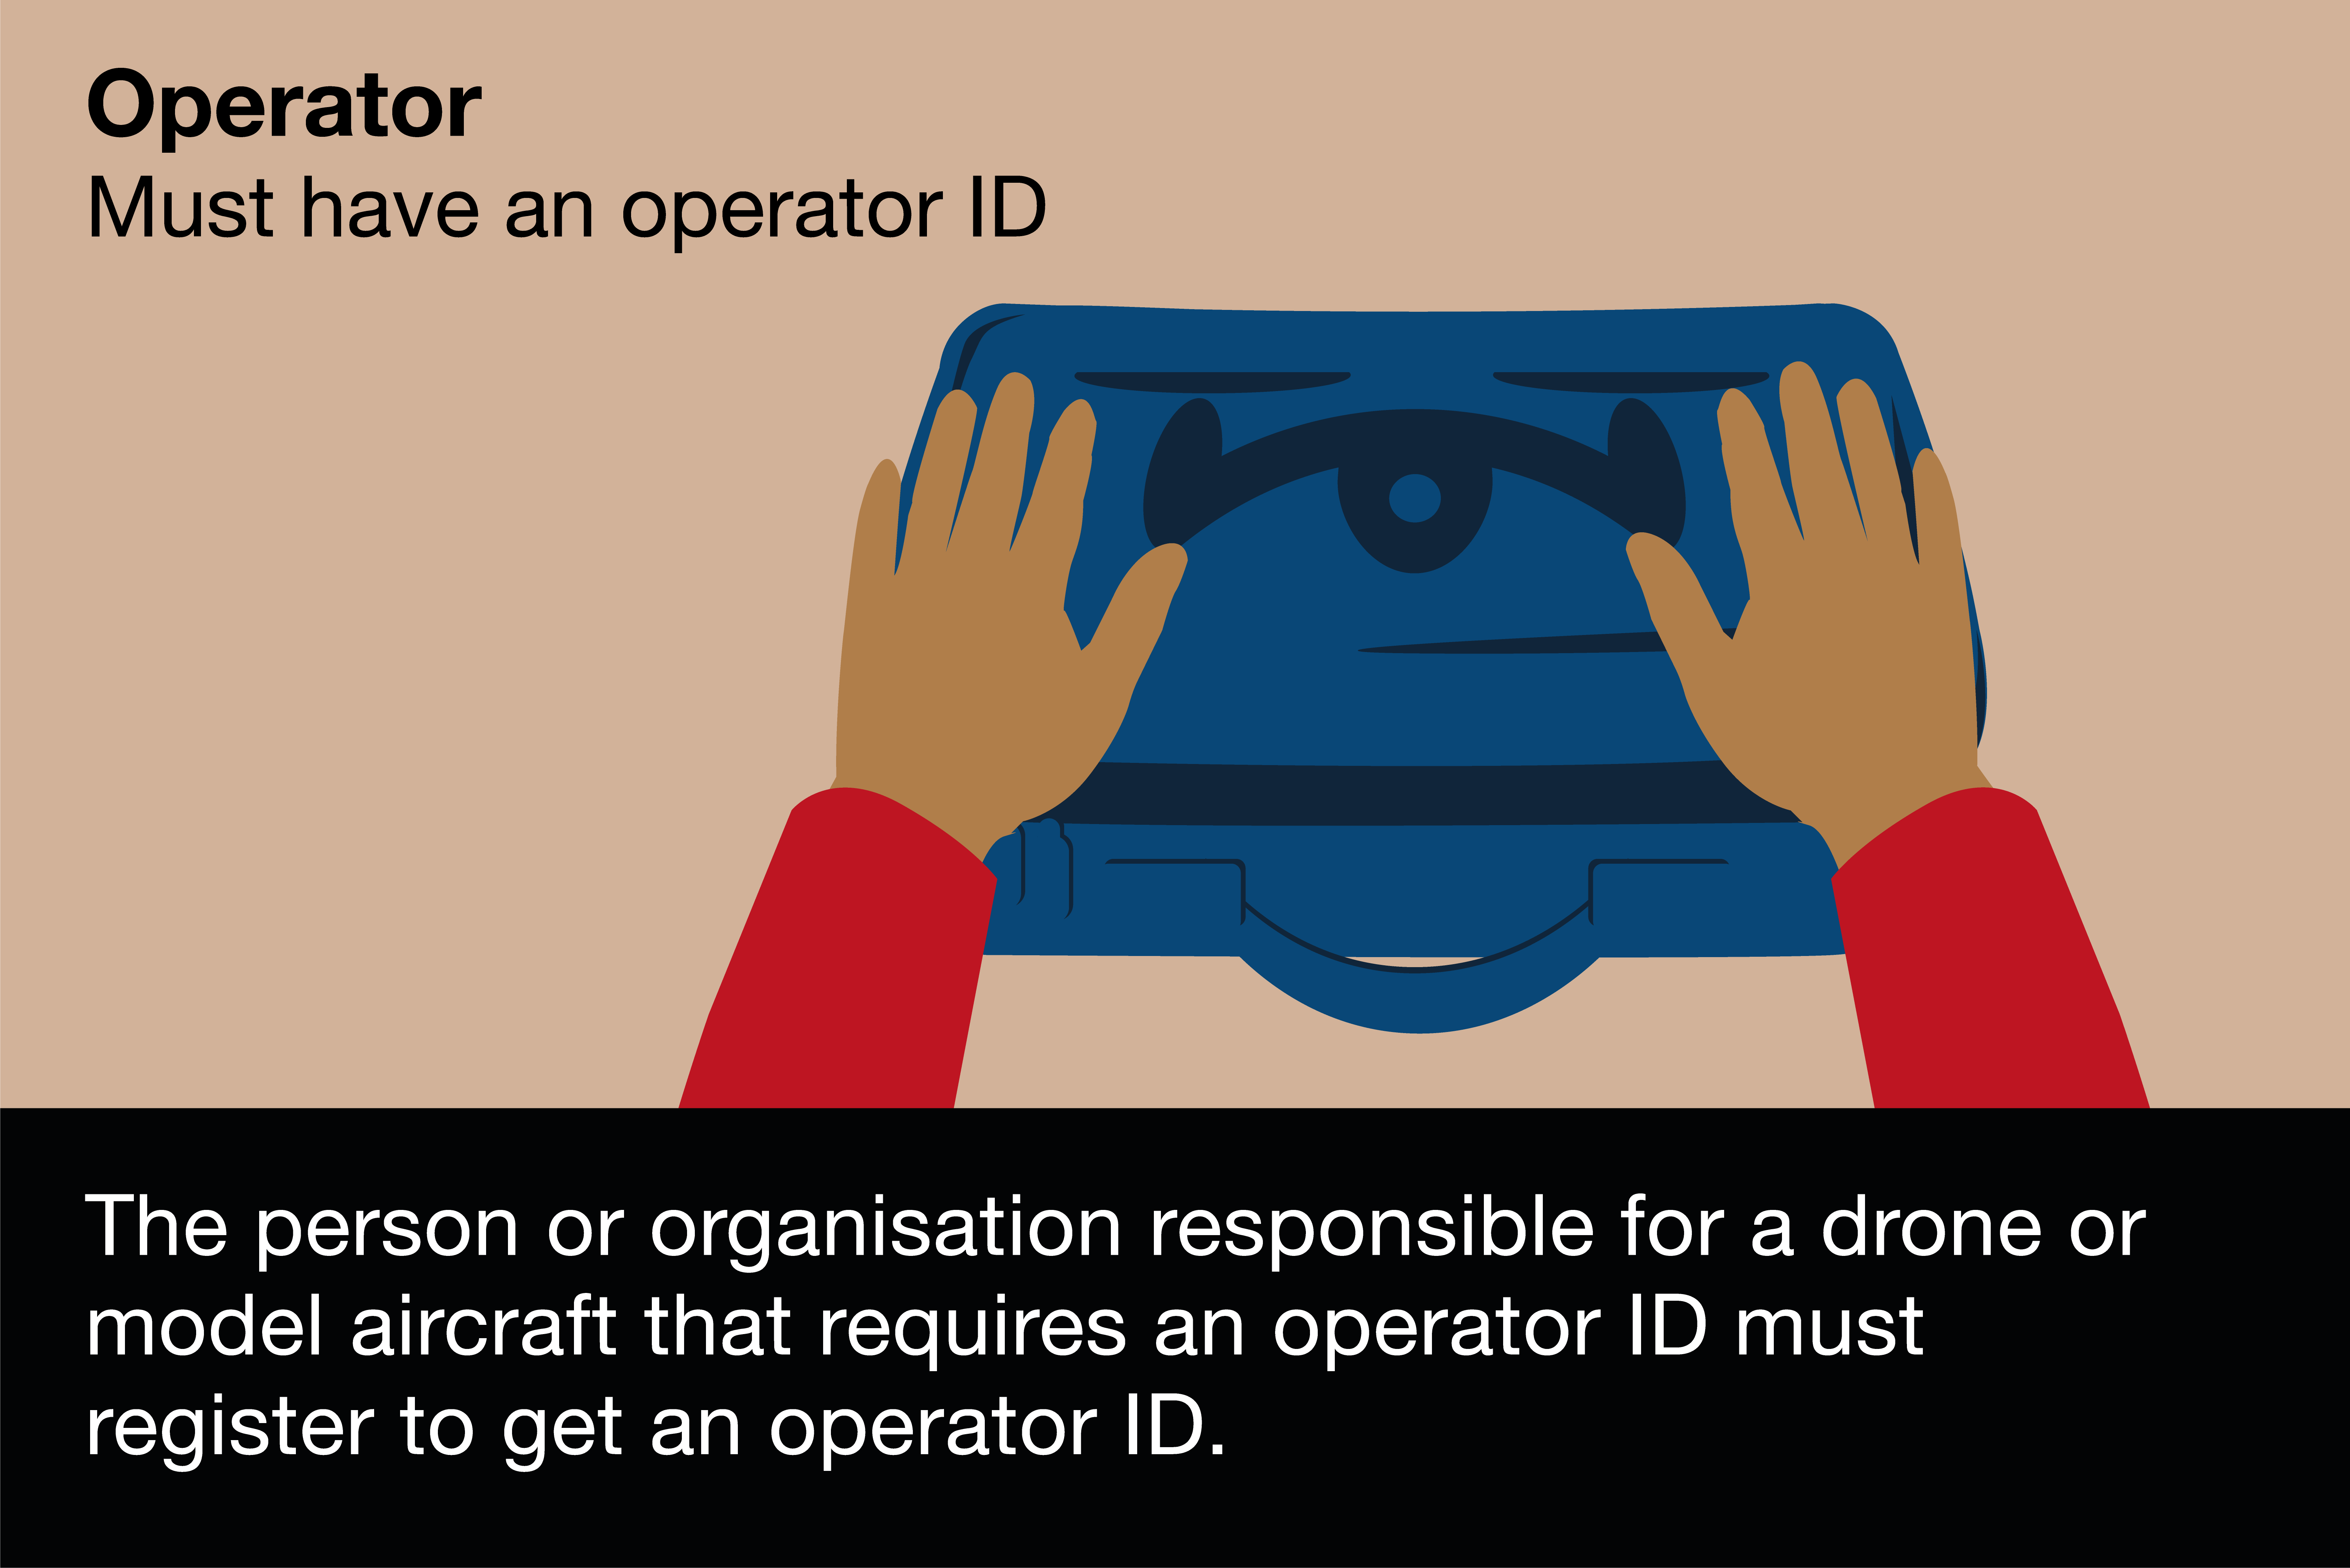 The person or organisation responsible for a drone or model aircraft that requires an operator ID must register to get an operator ID